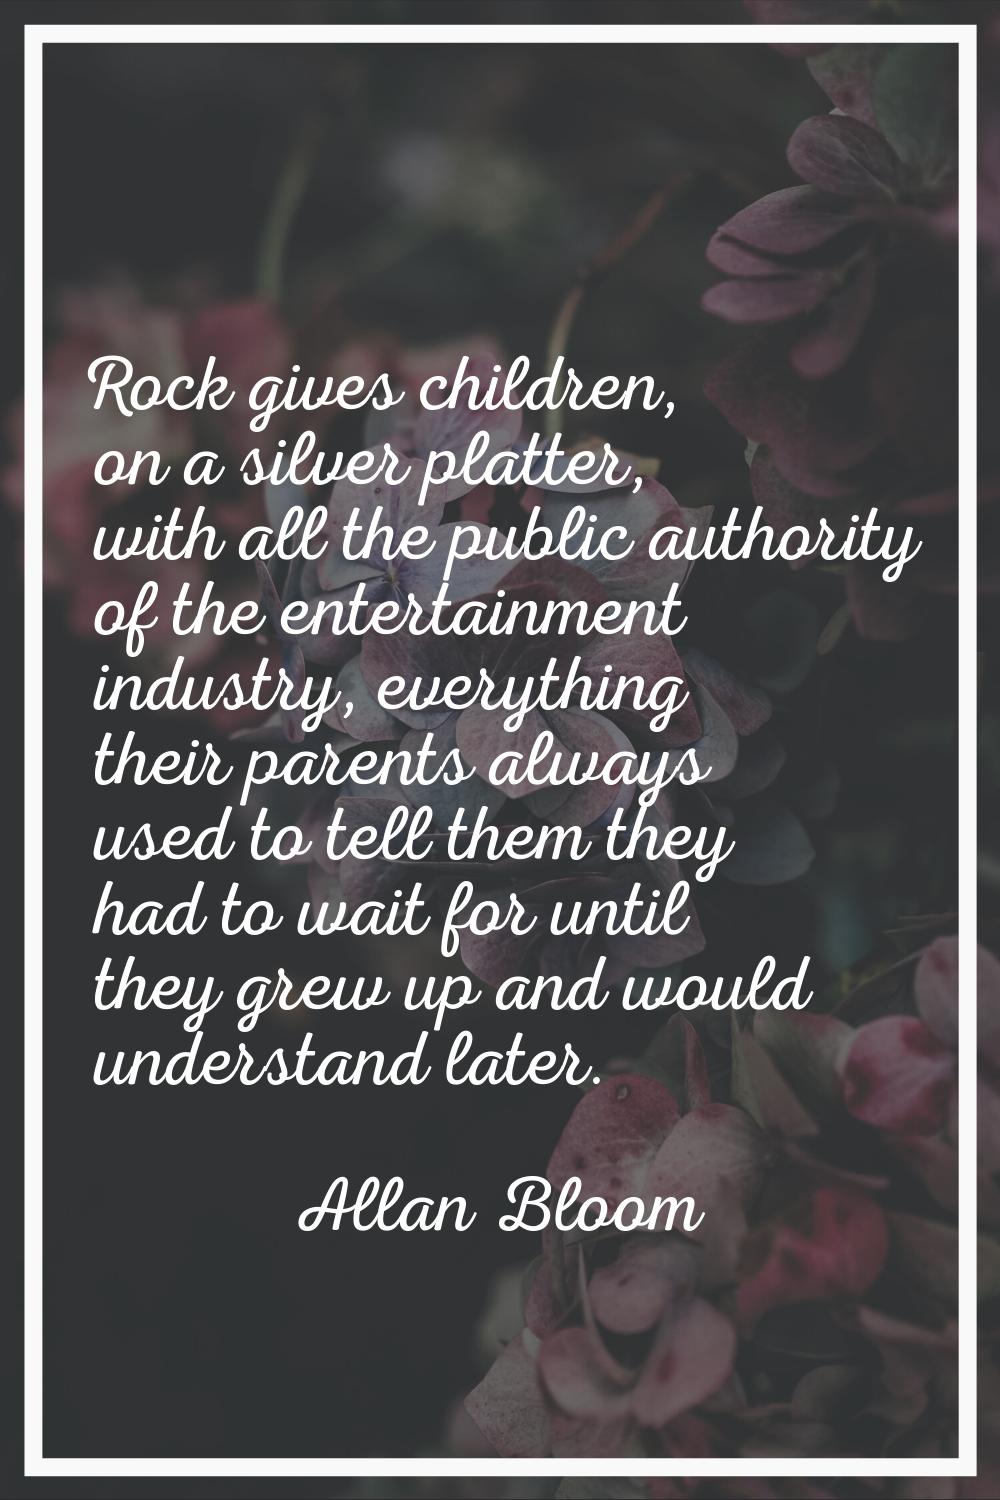 Rock gives children, on a silver platter, with all the public authority of the entertainment indust